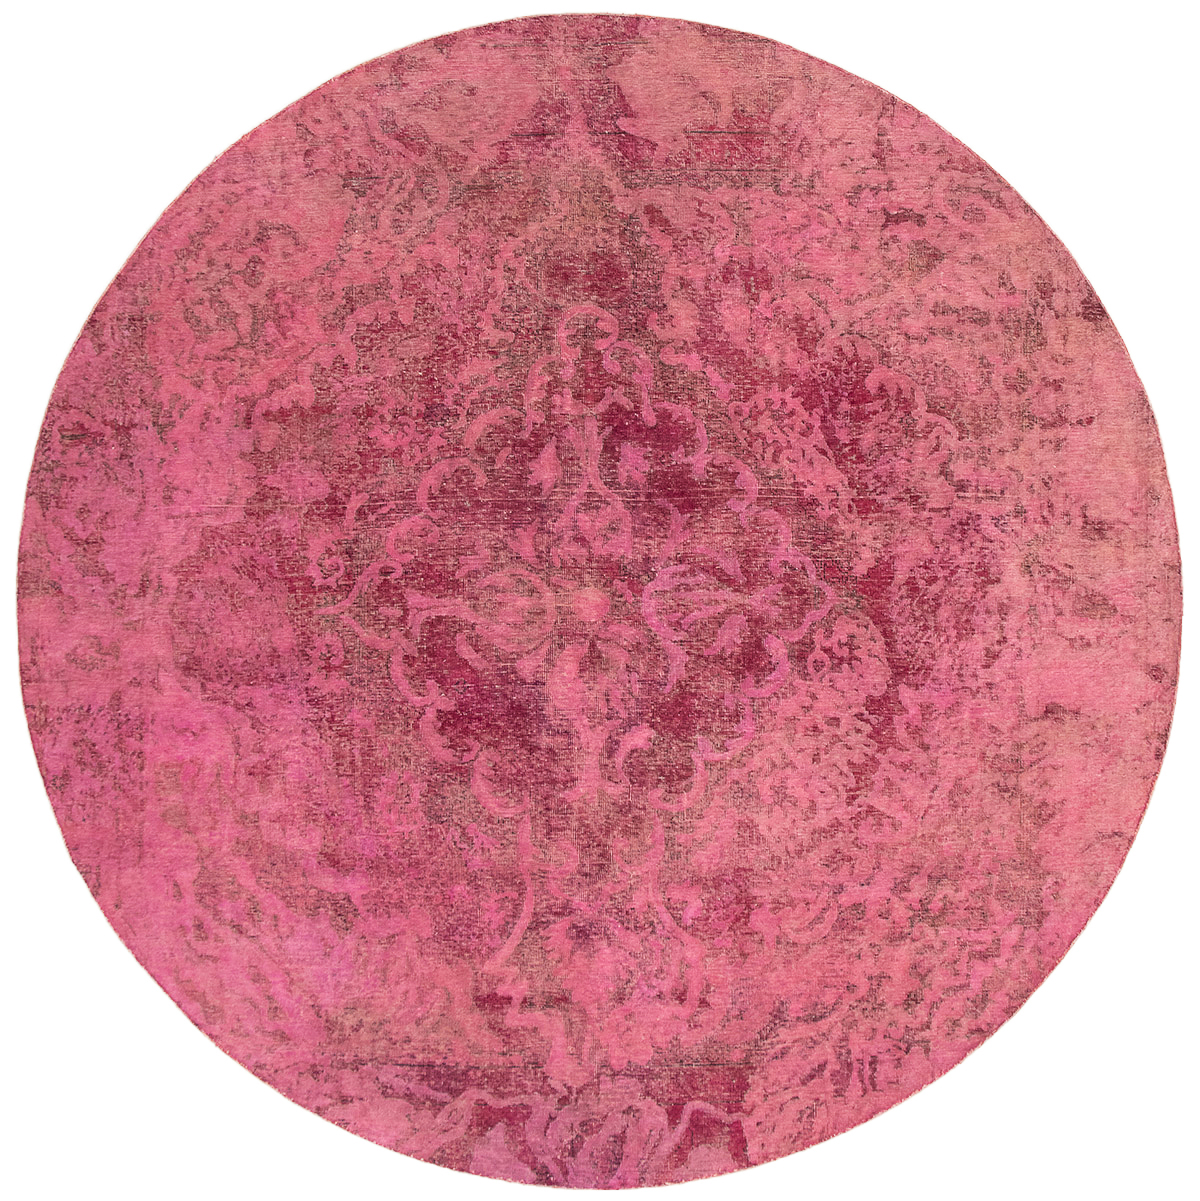 Hand-knotted Color Transition Dark Pink Wool Rug 9'4" x 9'5" Size: 9'4" x 9'5"  